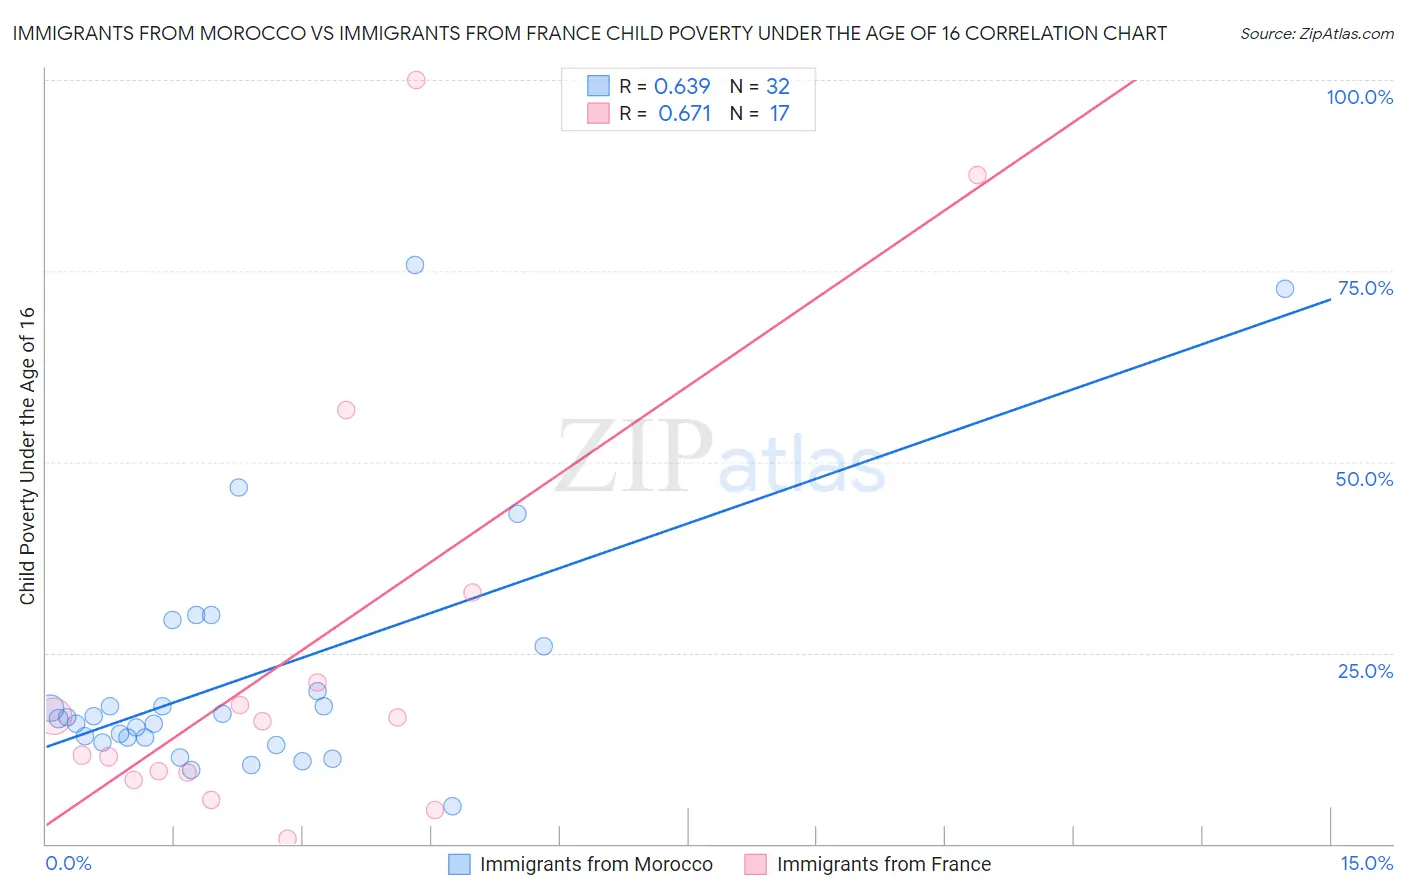 Immigrants from Morocco vs Immigrants from France Child Poverty Under the Age of 16